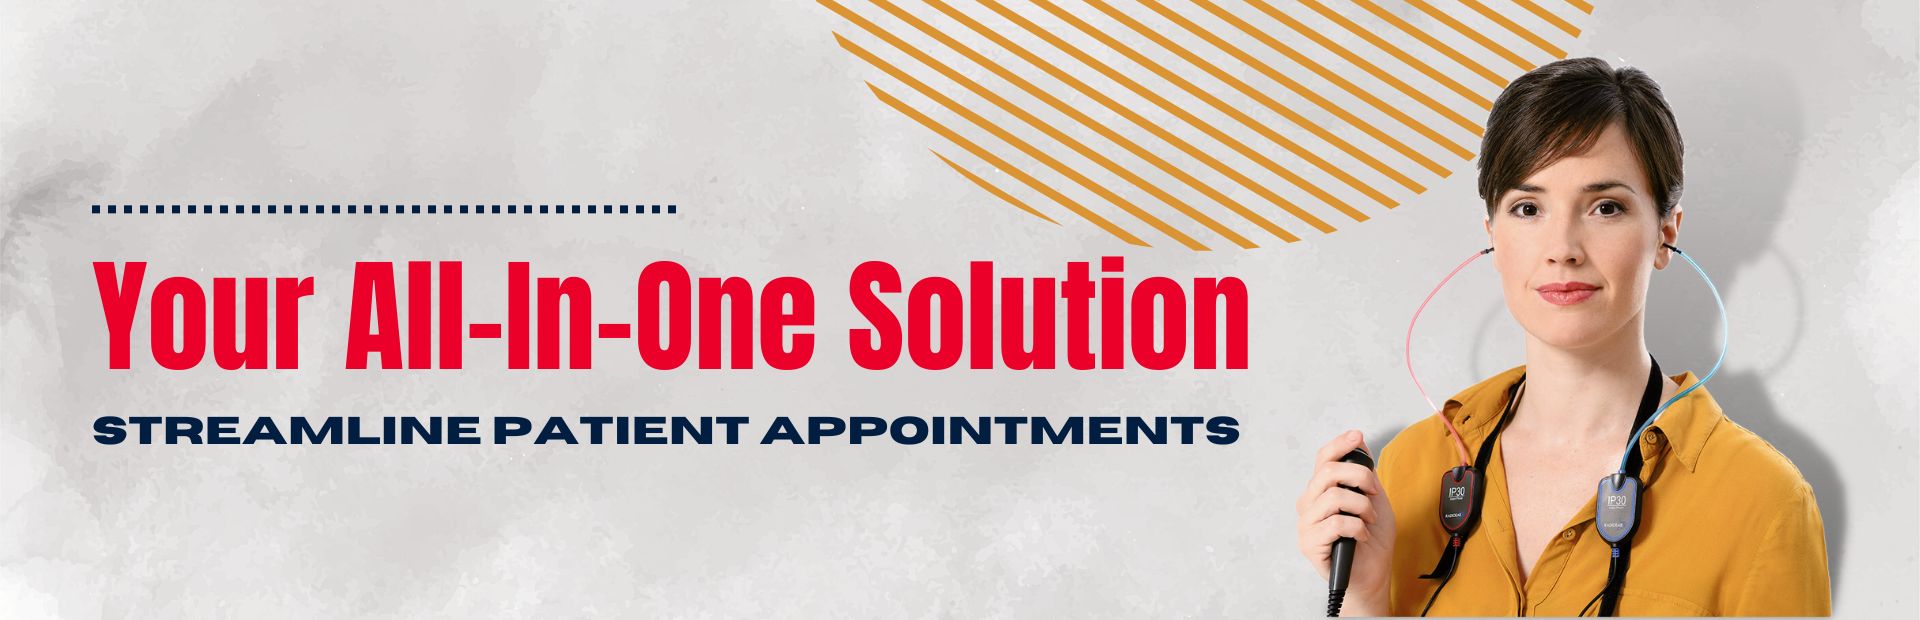 your-all-in-one-solution-1920x620-2